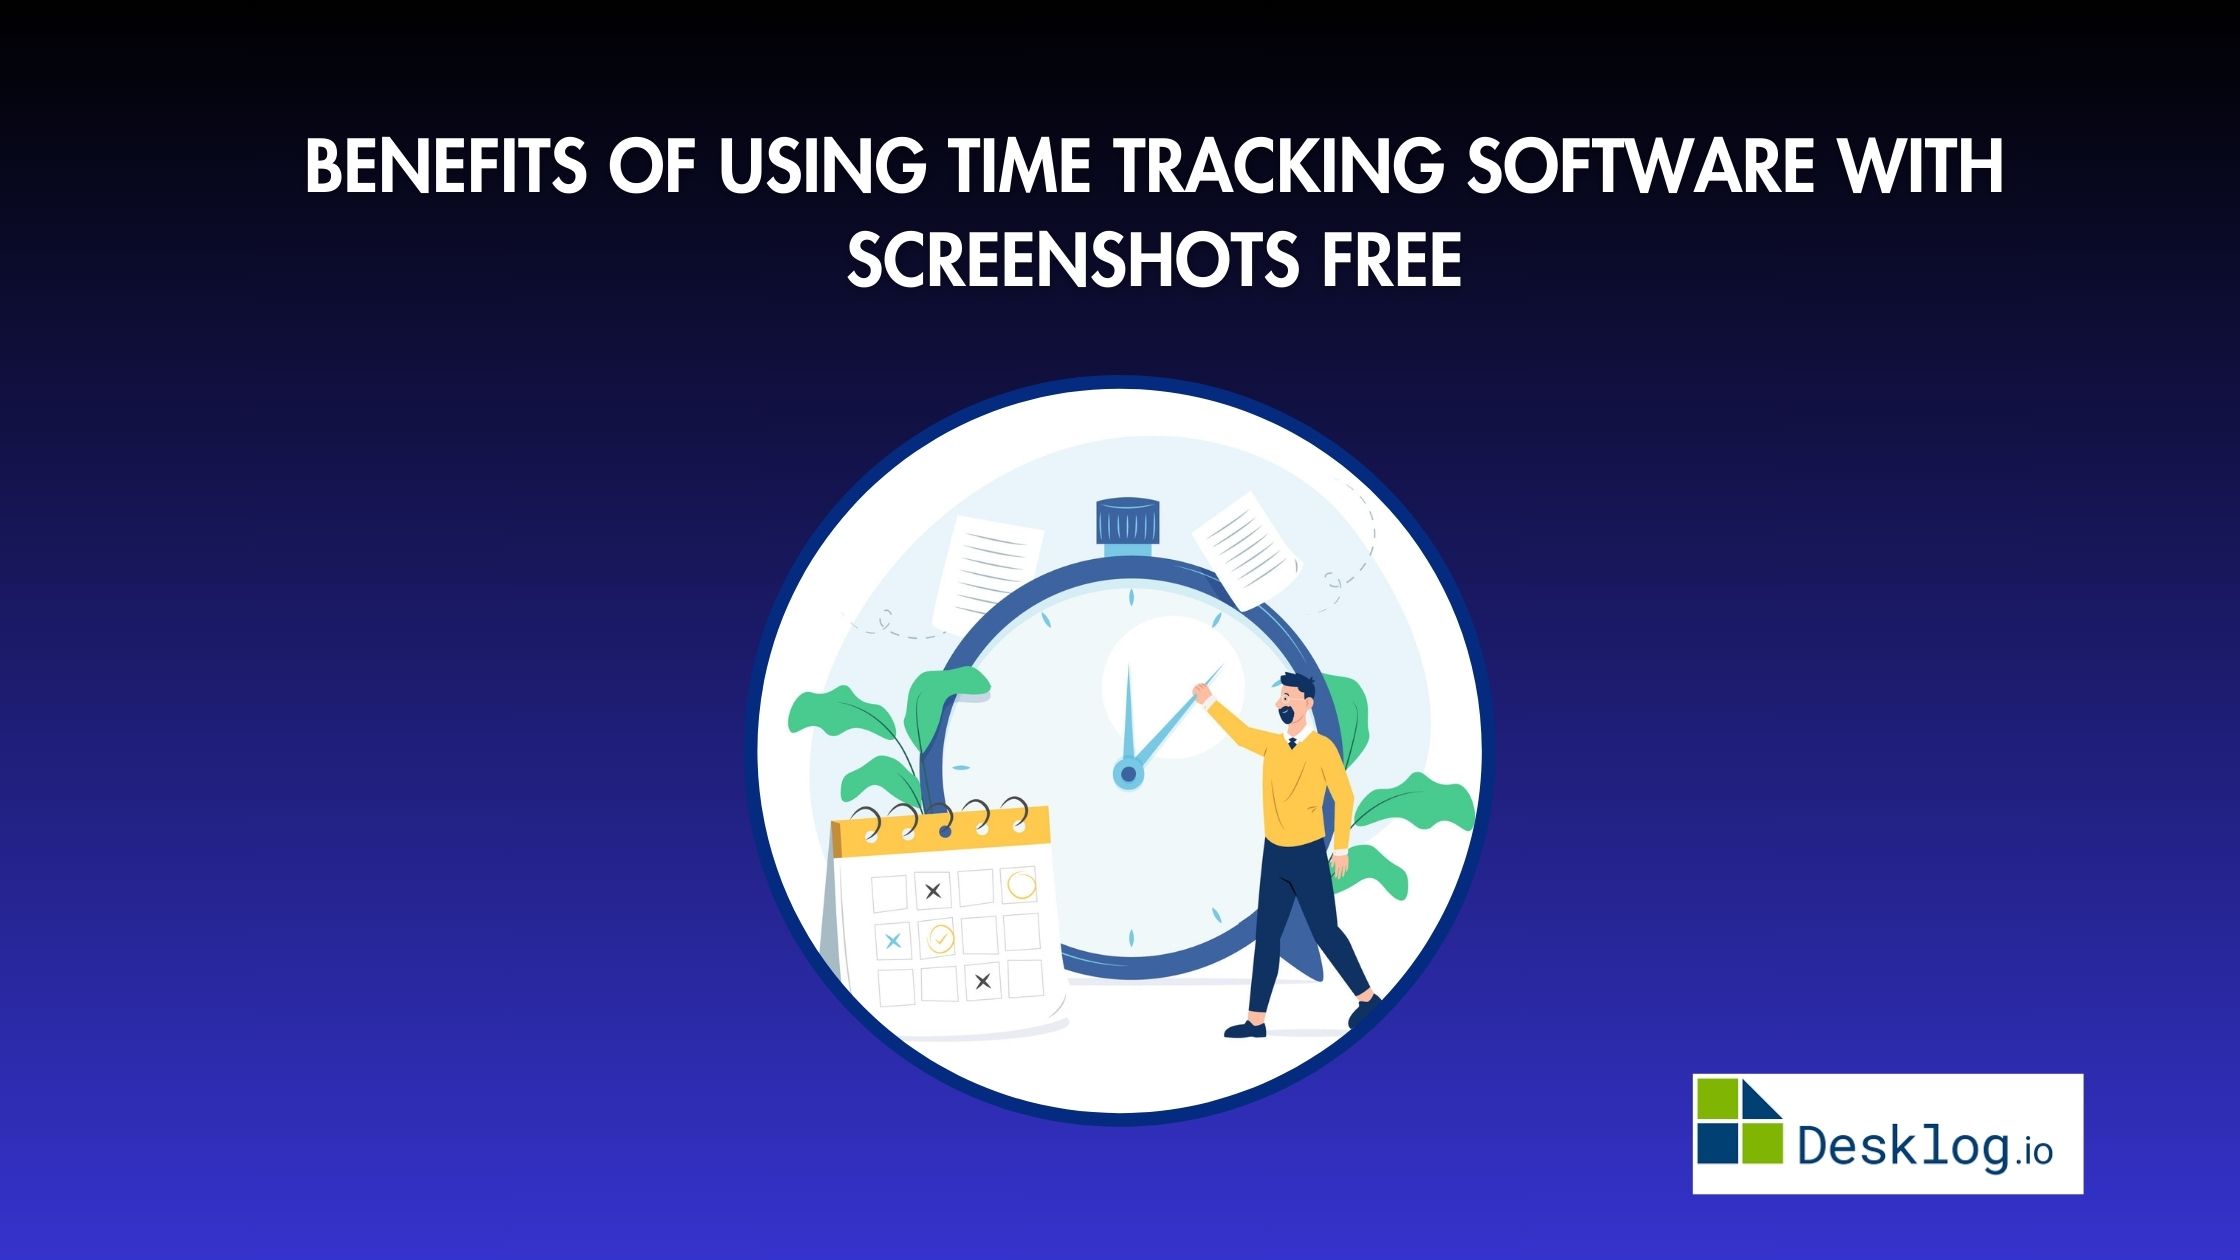 Time tracking software with screenshots